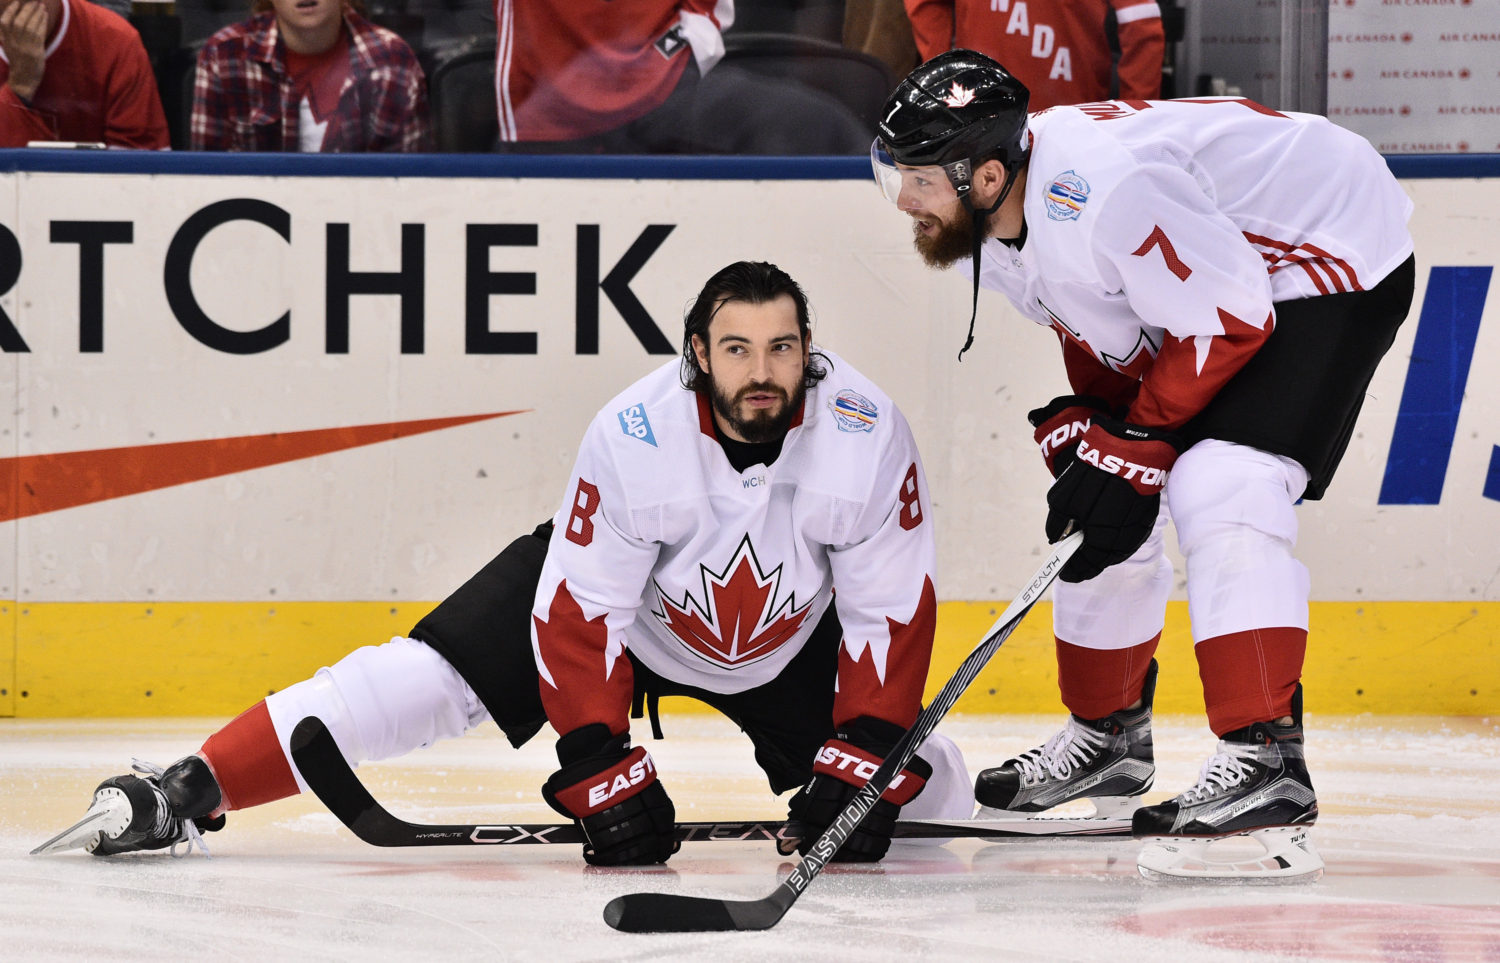 TORONTO, ON - SEPTEMBER 29: Drew Doughty #8 and Jake Muzzin #7 of Team Canada have a chat during warm up prior to Game Two of the World Cup of Hockey 2016 final series at the Air Canada Centre on September 29, 2016 in Toronto, Canada. (Photo by Minas Panagiotakis/World Cup of Hockey via Getty Images)